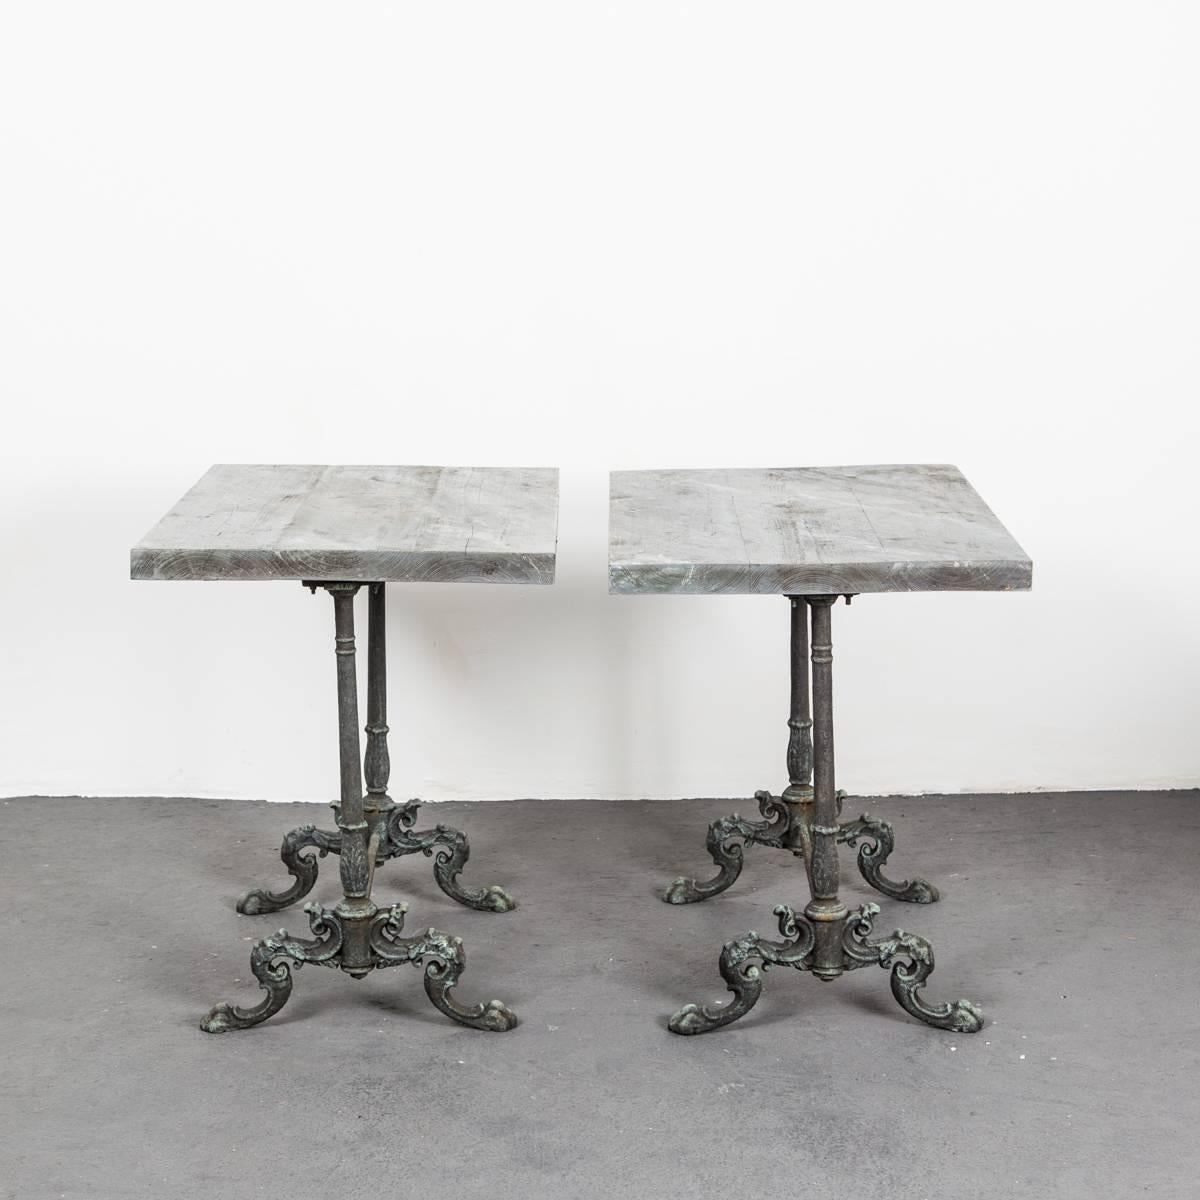 A pair of green patinated cast iron table with tops made from faux stone painted wooden tops. The bases most likely from the end of 19th century. Tops new.